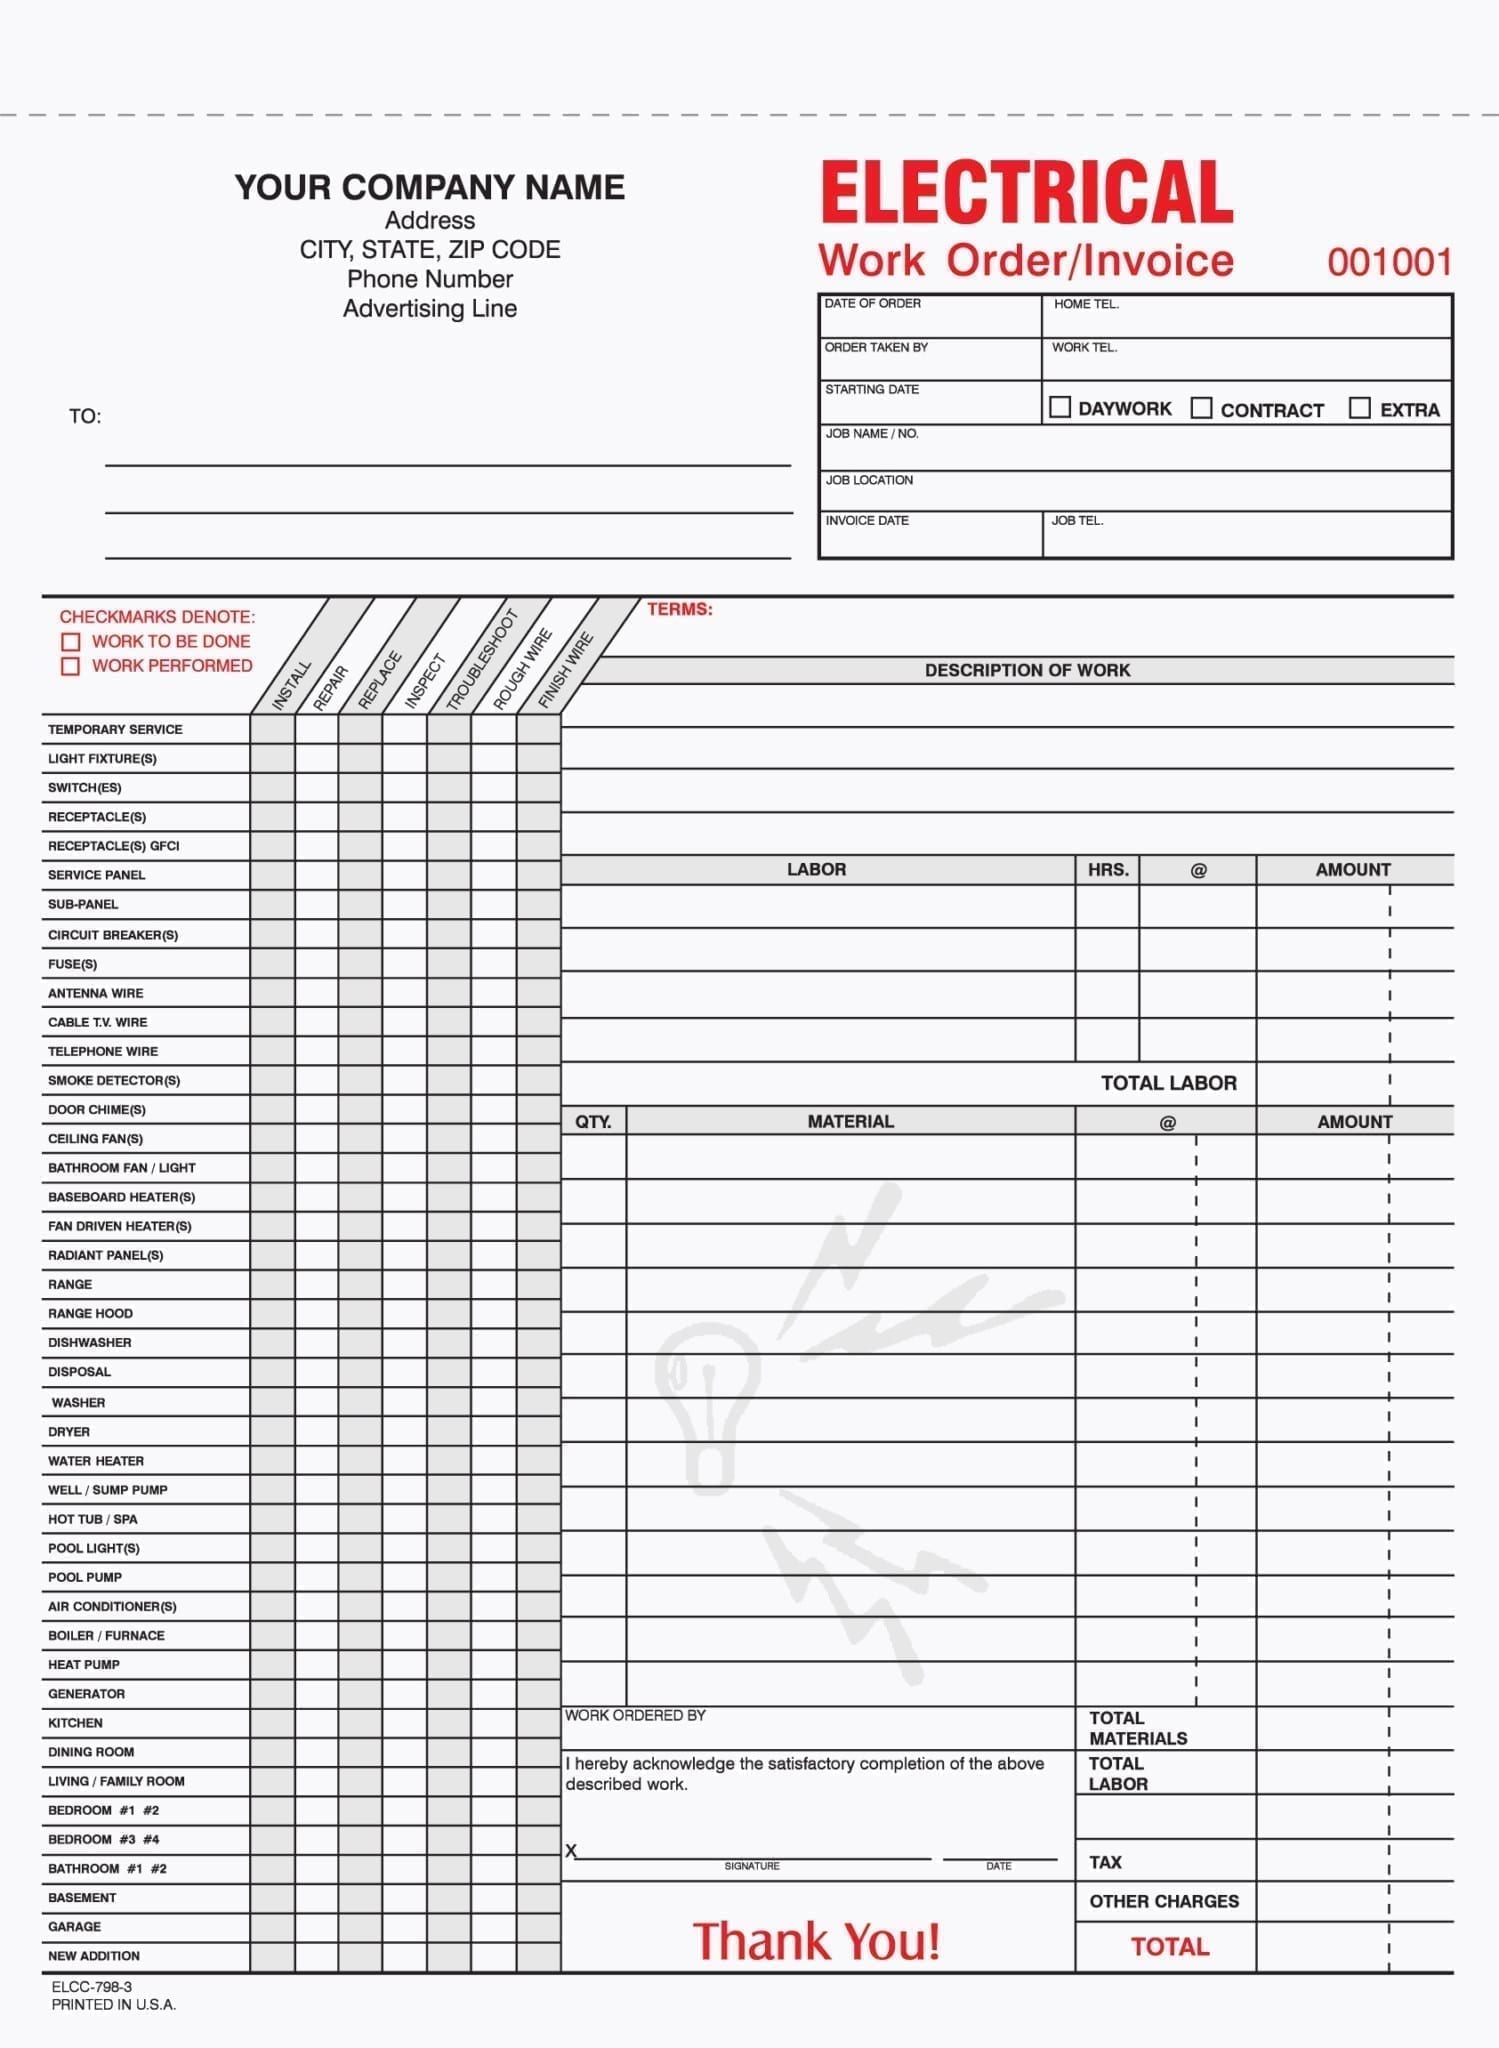 3 Part Electrician Work Order Forms